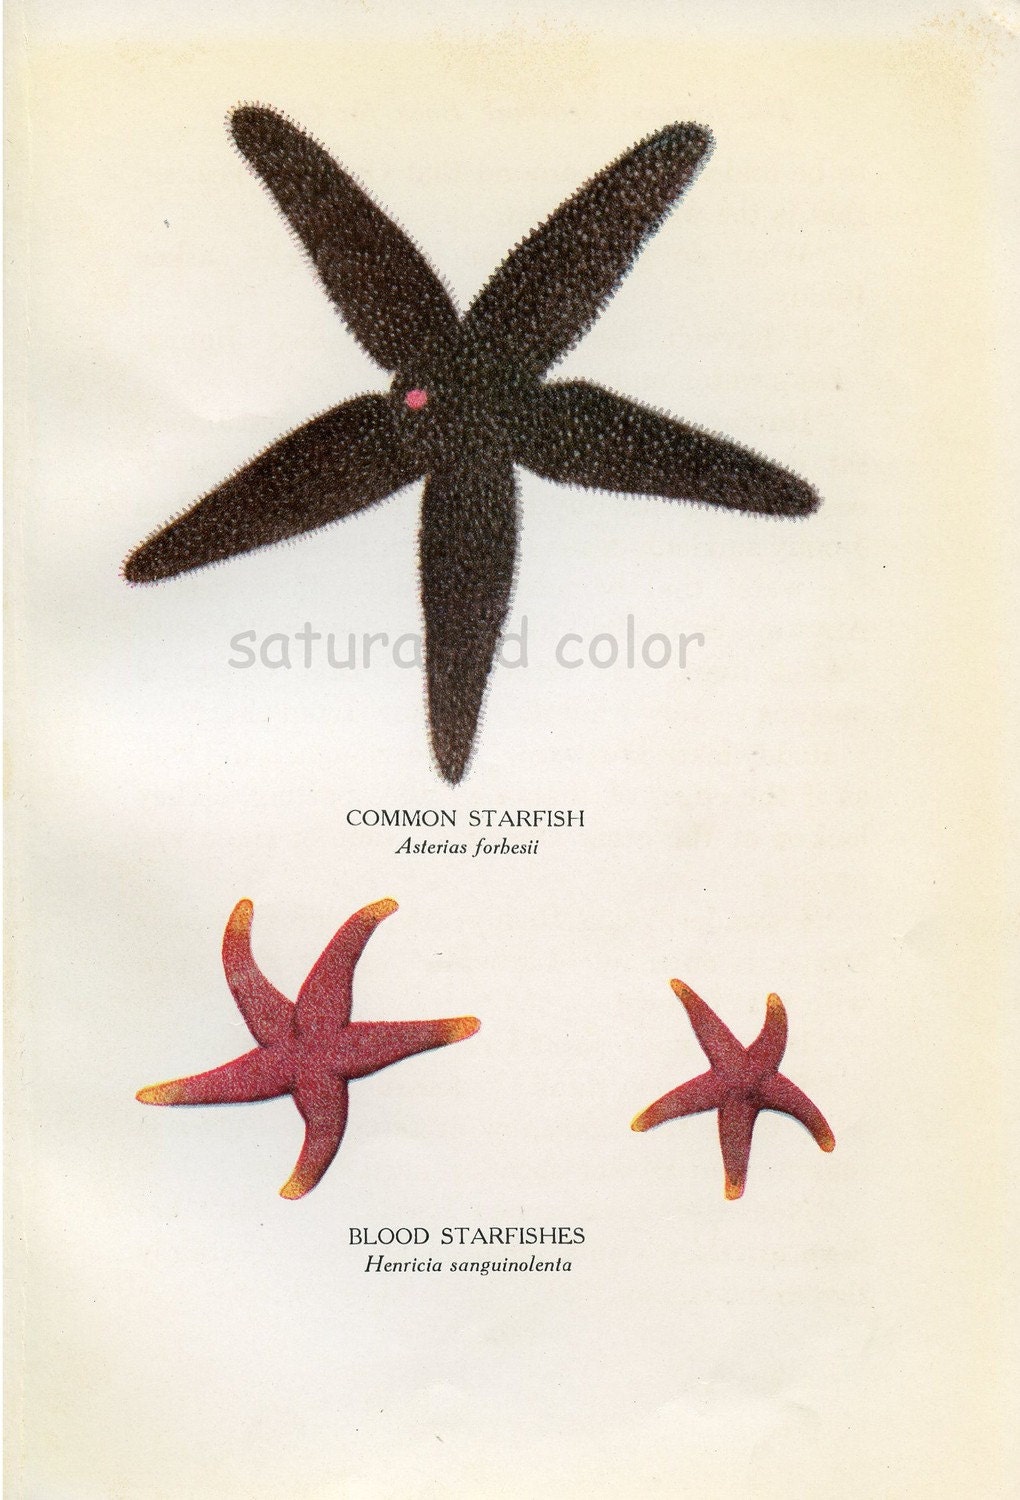 1929 Sea Life Vintage Bookplate - "Common Starfish" and "Blood Starfishes" to frame or for altered art